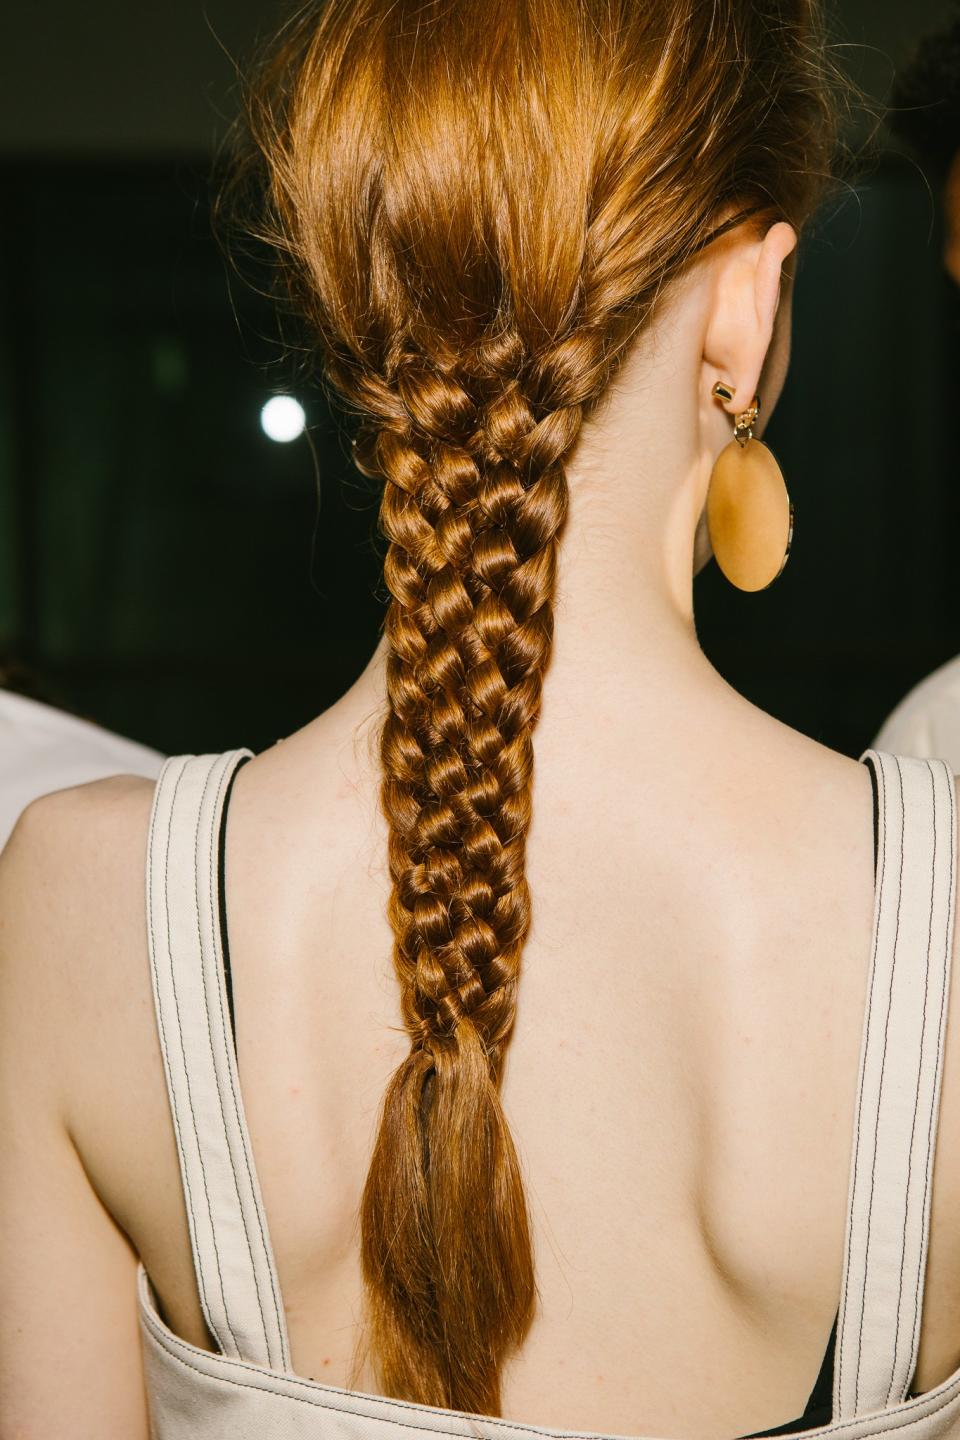 With your to-do list almost complete, find your wedding day hair inspiration on the Spring 2018 runway.